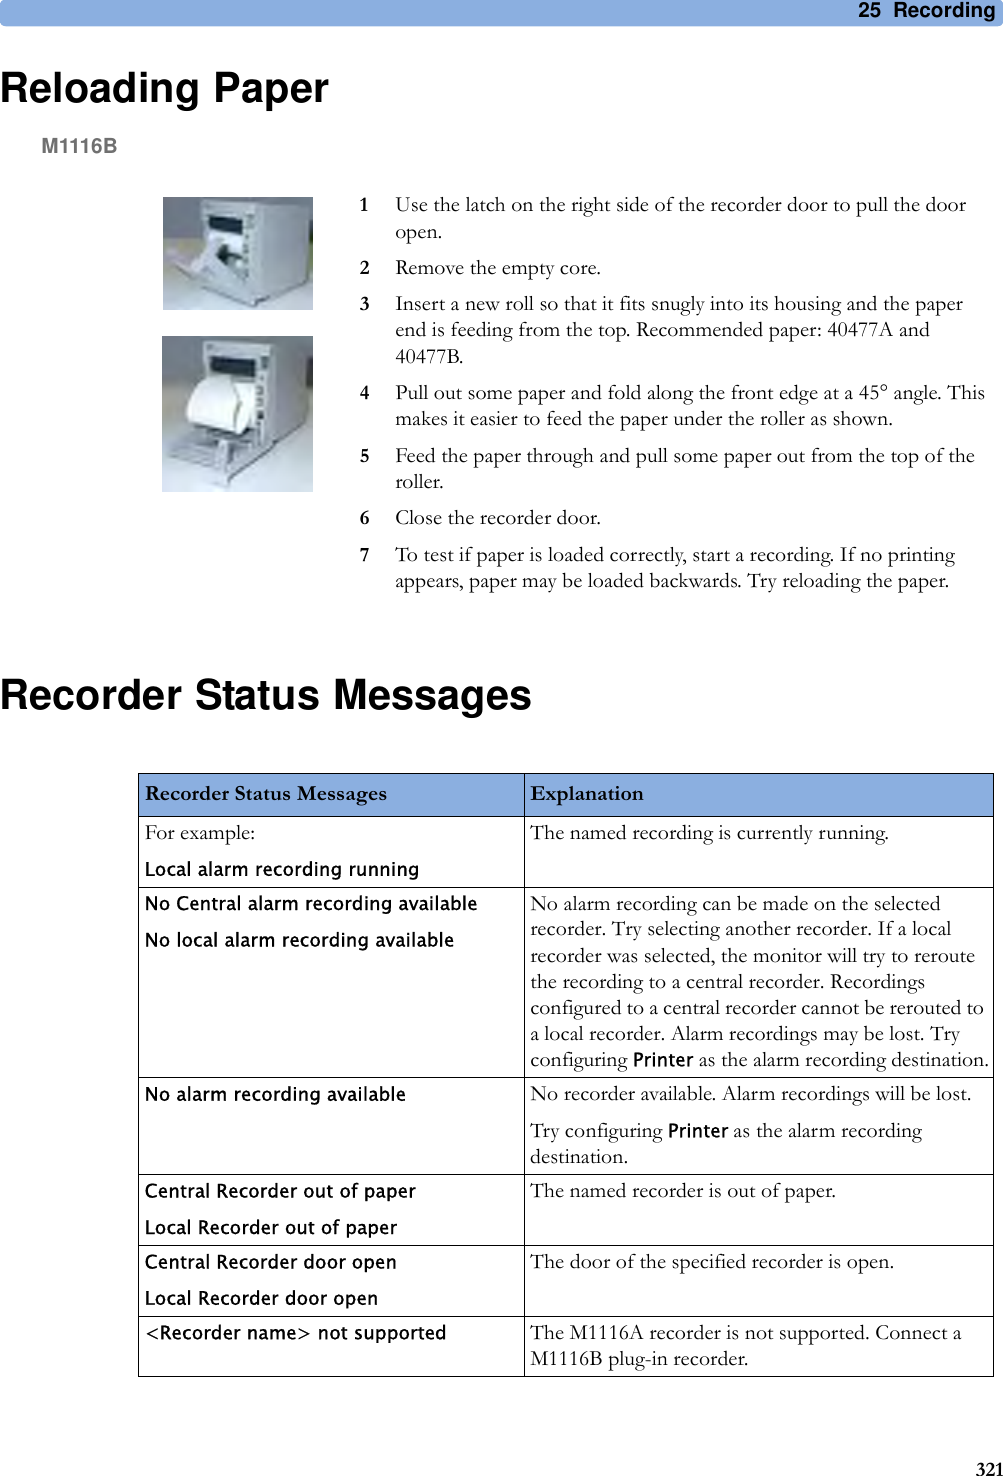 25 Recording321Reloading PaperM1116BRecorder Status Messages1Use the latch on the right side of the recorder door to pull the door open.2Remove the empty core.3Insert a new roll so that it fits snugly into its housing and the paper end is feeding from the top. Recommended paper: 40477A and 40477B.4Pull out some paper and fold along the front edge at a 45° angle. This makes it easier to feed the paper under the roller as shown.5Feed the paper through and pull some paper out from the top of the roller.6Close the recorder door.7To test if paper is loaded correctly, start a recording. If no printing appears, paper may be loaded backwards. Try reloading the paper.Recorder Status Messages ExplanationFor example:Local alarm recording runningThe named recording is currently running.No Central alarm recording availableNo local alarm recording availableNo alarm recording can be made on the selected recorder. Try selecting another recorder. If a local recorder was selected, the monitor will try to reroute the recording to a central recorder. Recordings configured to a central recorder cannot be rerouted to a local recorder. Alarm recordings may be lost. Try configuring Printer as the alarm recording destination.No alarm recording available No recorder available. Alarm recordings will be lost.Try configuring Printer as the alarm recording destination.Central Recorder out of paperLocal Recorder out of paperThe named recorder is out of paper.Central Recorder door openLocal Recorder door openThe door of the specified recorder is open.&lt;Recorder name&gt; not supported The M1116A recorder is not supported. Connect a M1116B plug-in recorder.